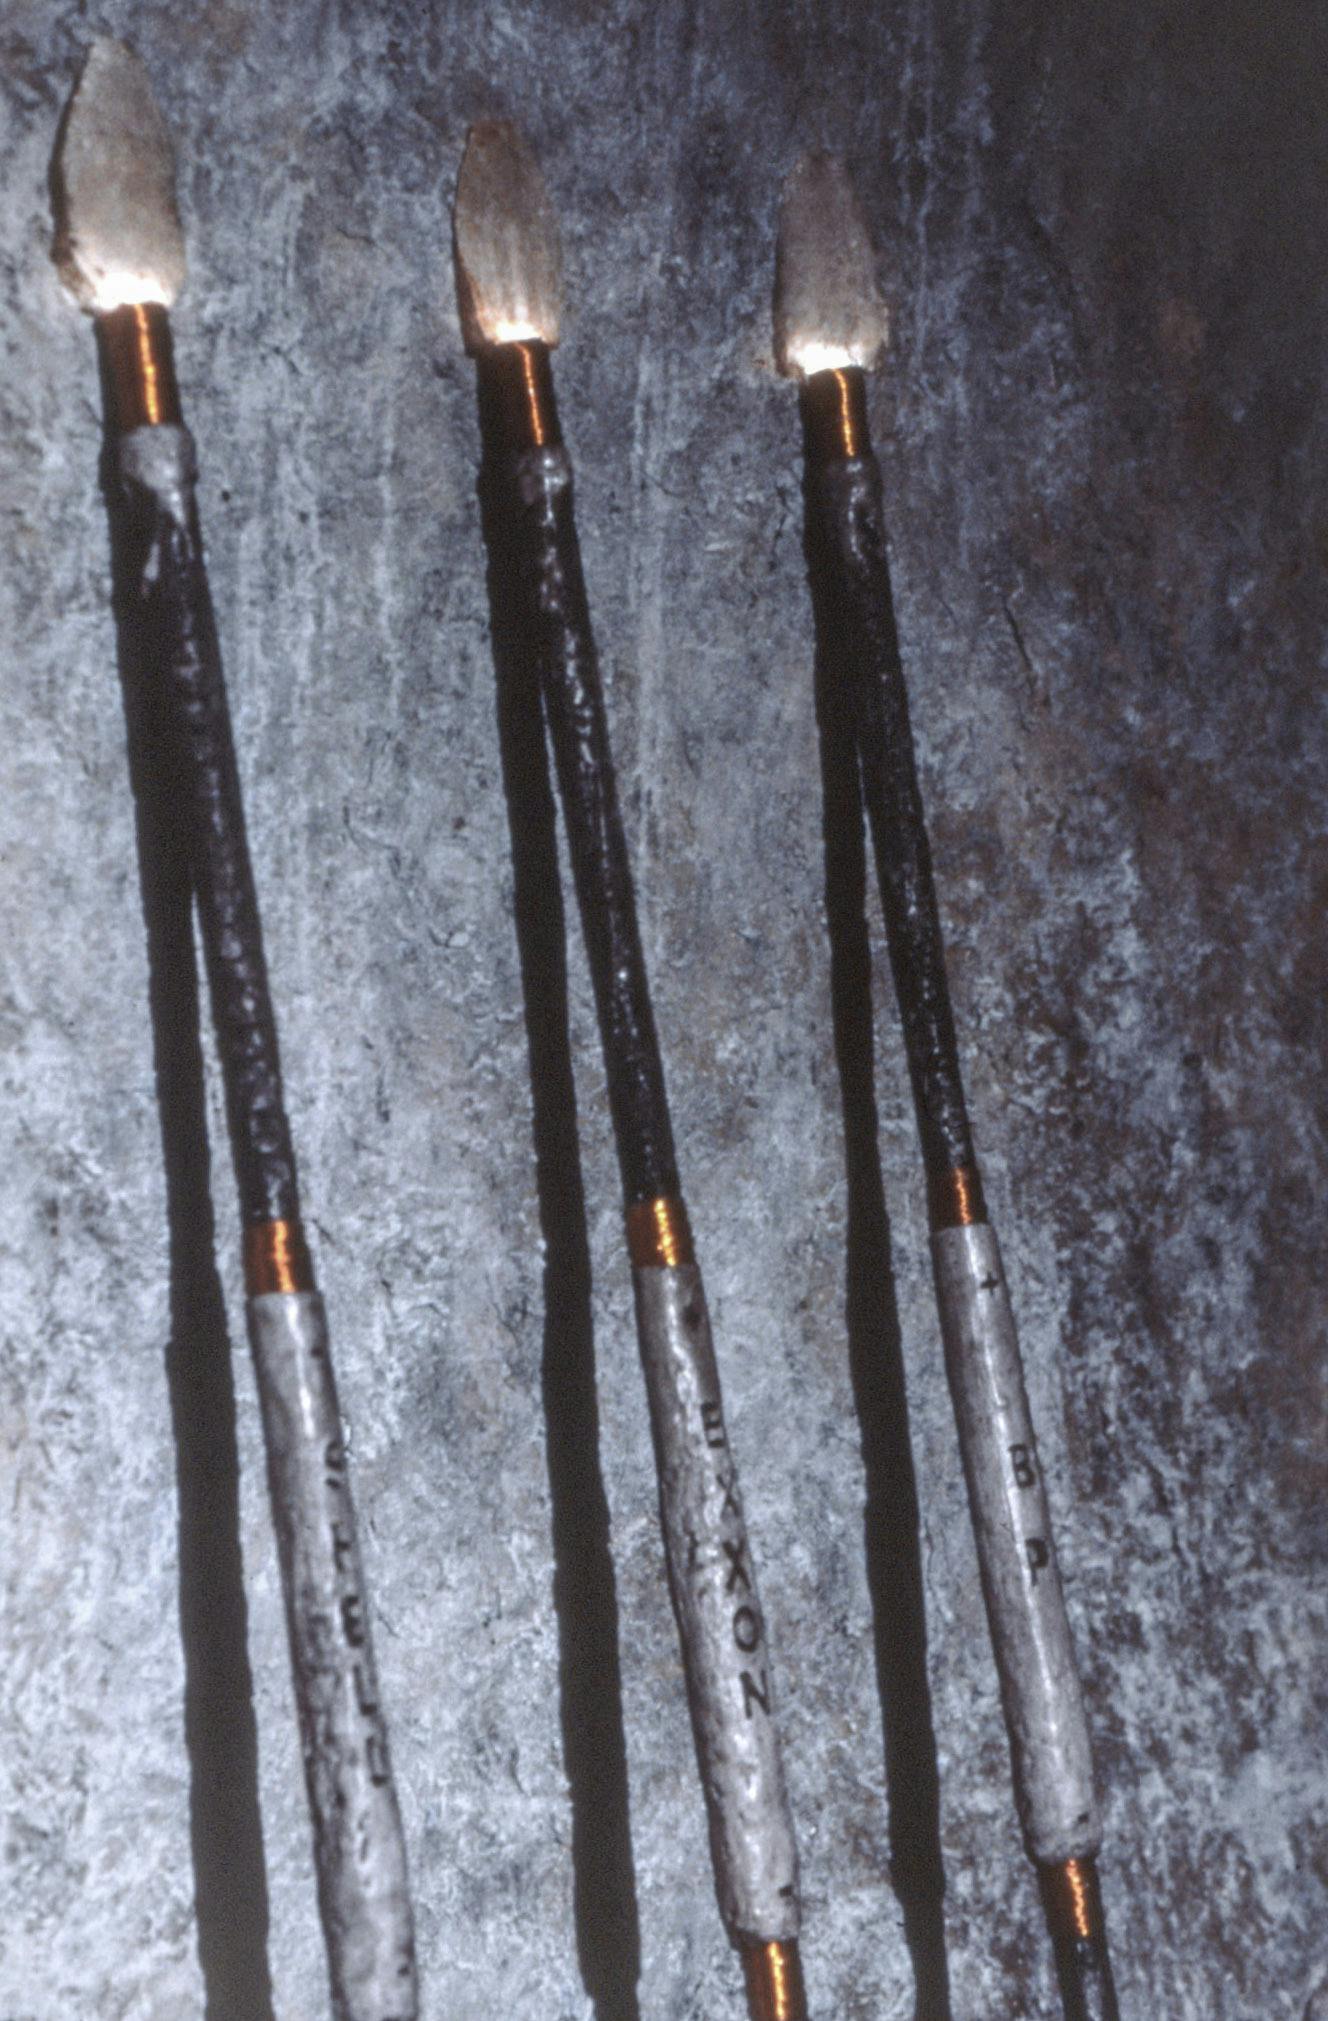 A closeup of 3 spears resting against a rock sculpture. Their points are a pearly white, attached by orange wire. On their hilts, the spears have rock texture reading "Shell," "Exxon," and "BP." 